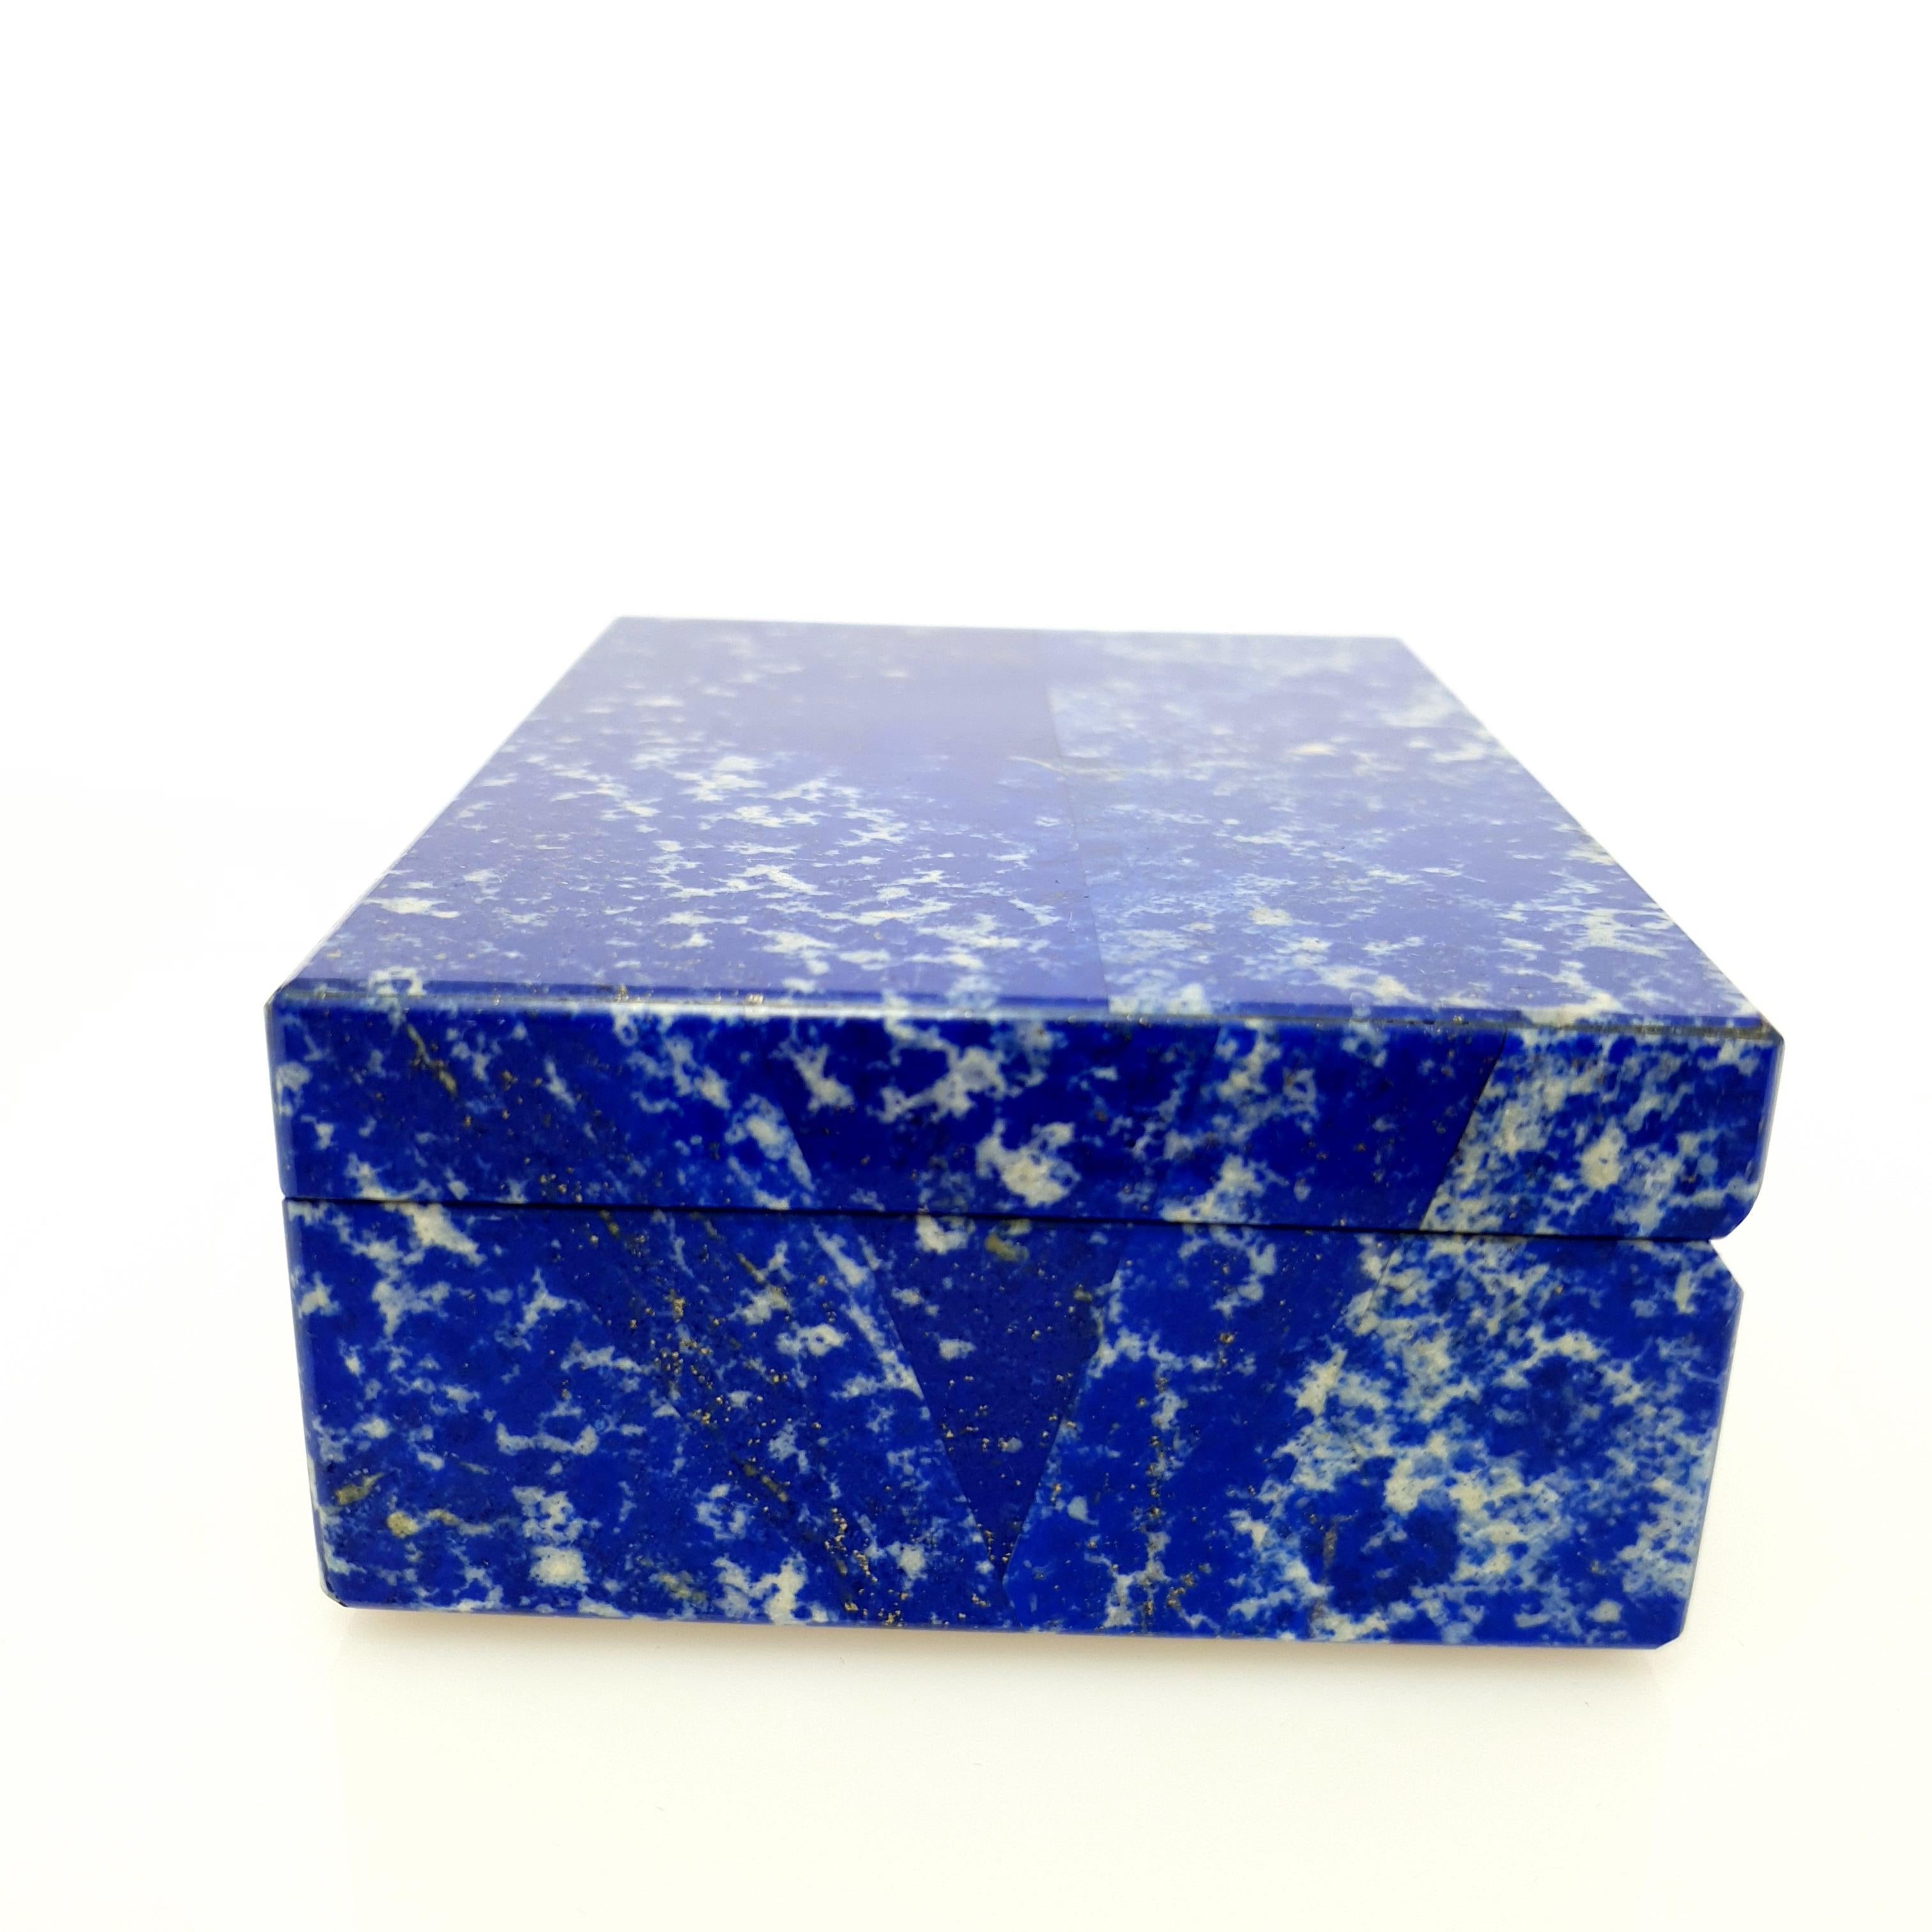 Women's or Men's White Blue Lapis Decorative Jewelry Gemstone Box with Black Marble Inlay